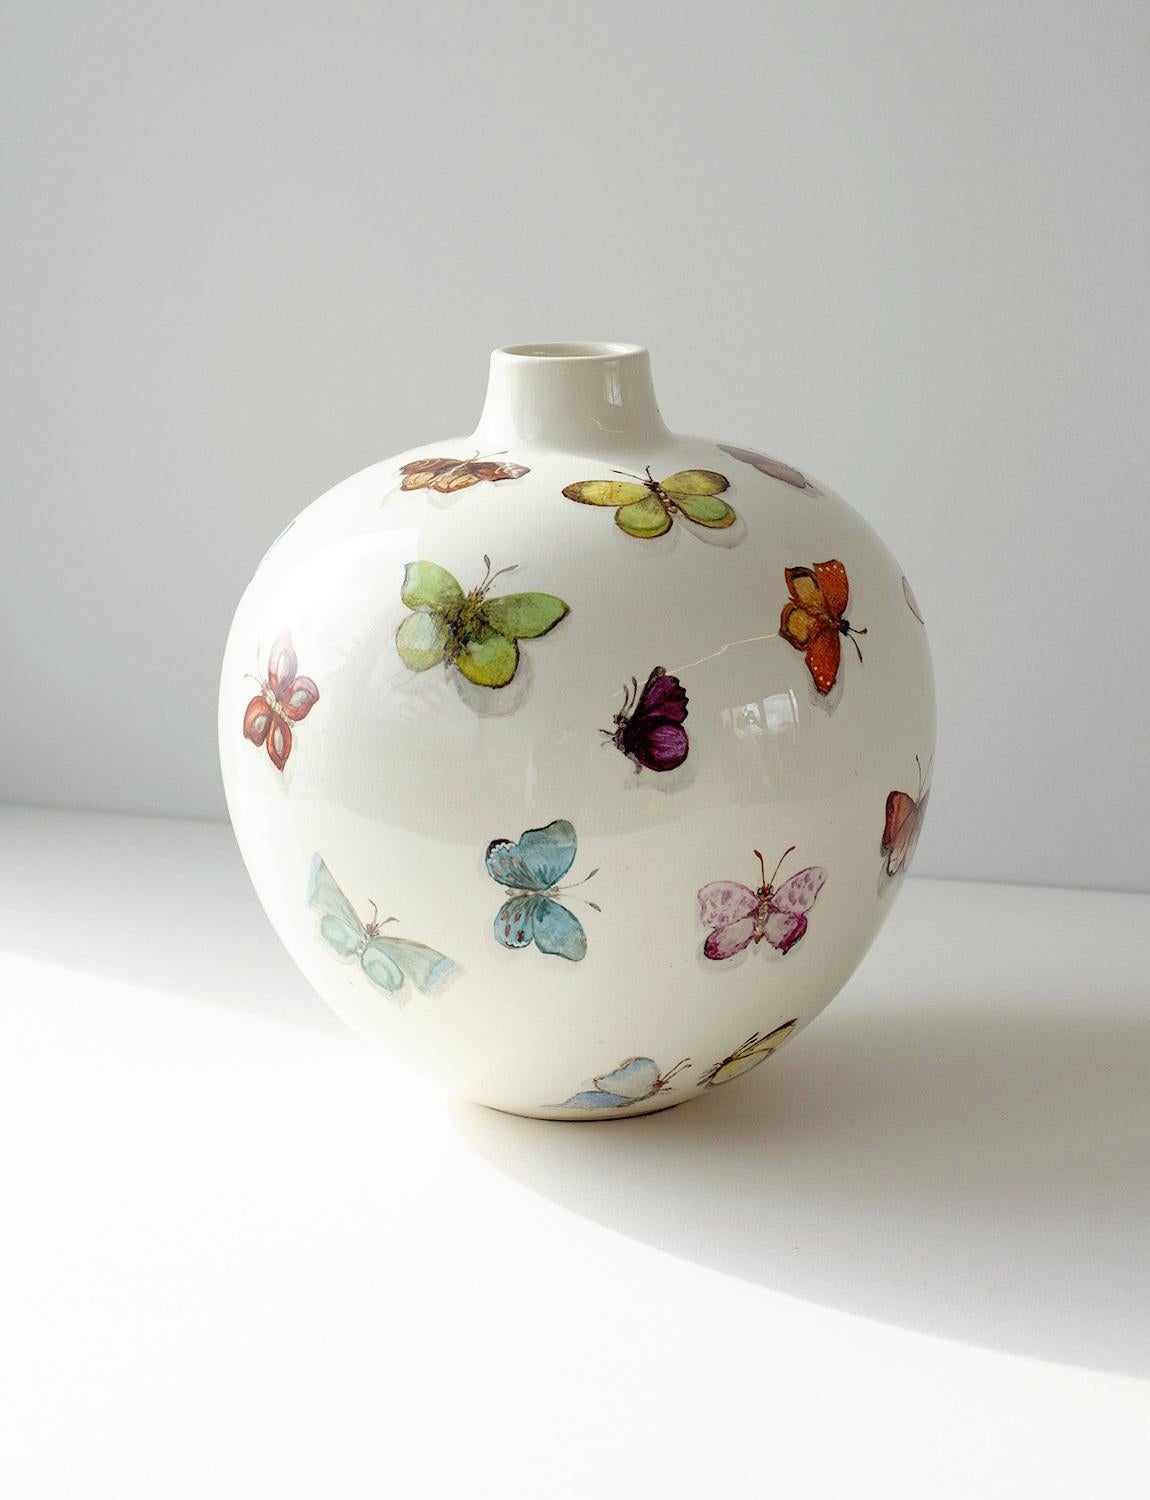 This exceptionally rare and beautiful Butterfly Vase was designed by Guido Andlovitz for the ceramics house, Società Ceramica Italiana, Lavenia where he was the Art Director in the 1930s. This shape and style of Andlovitz vase is documented in his